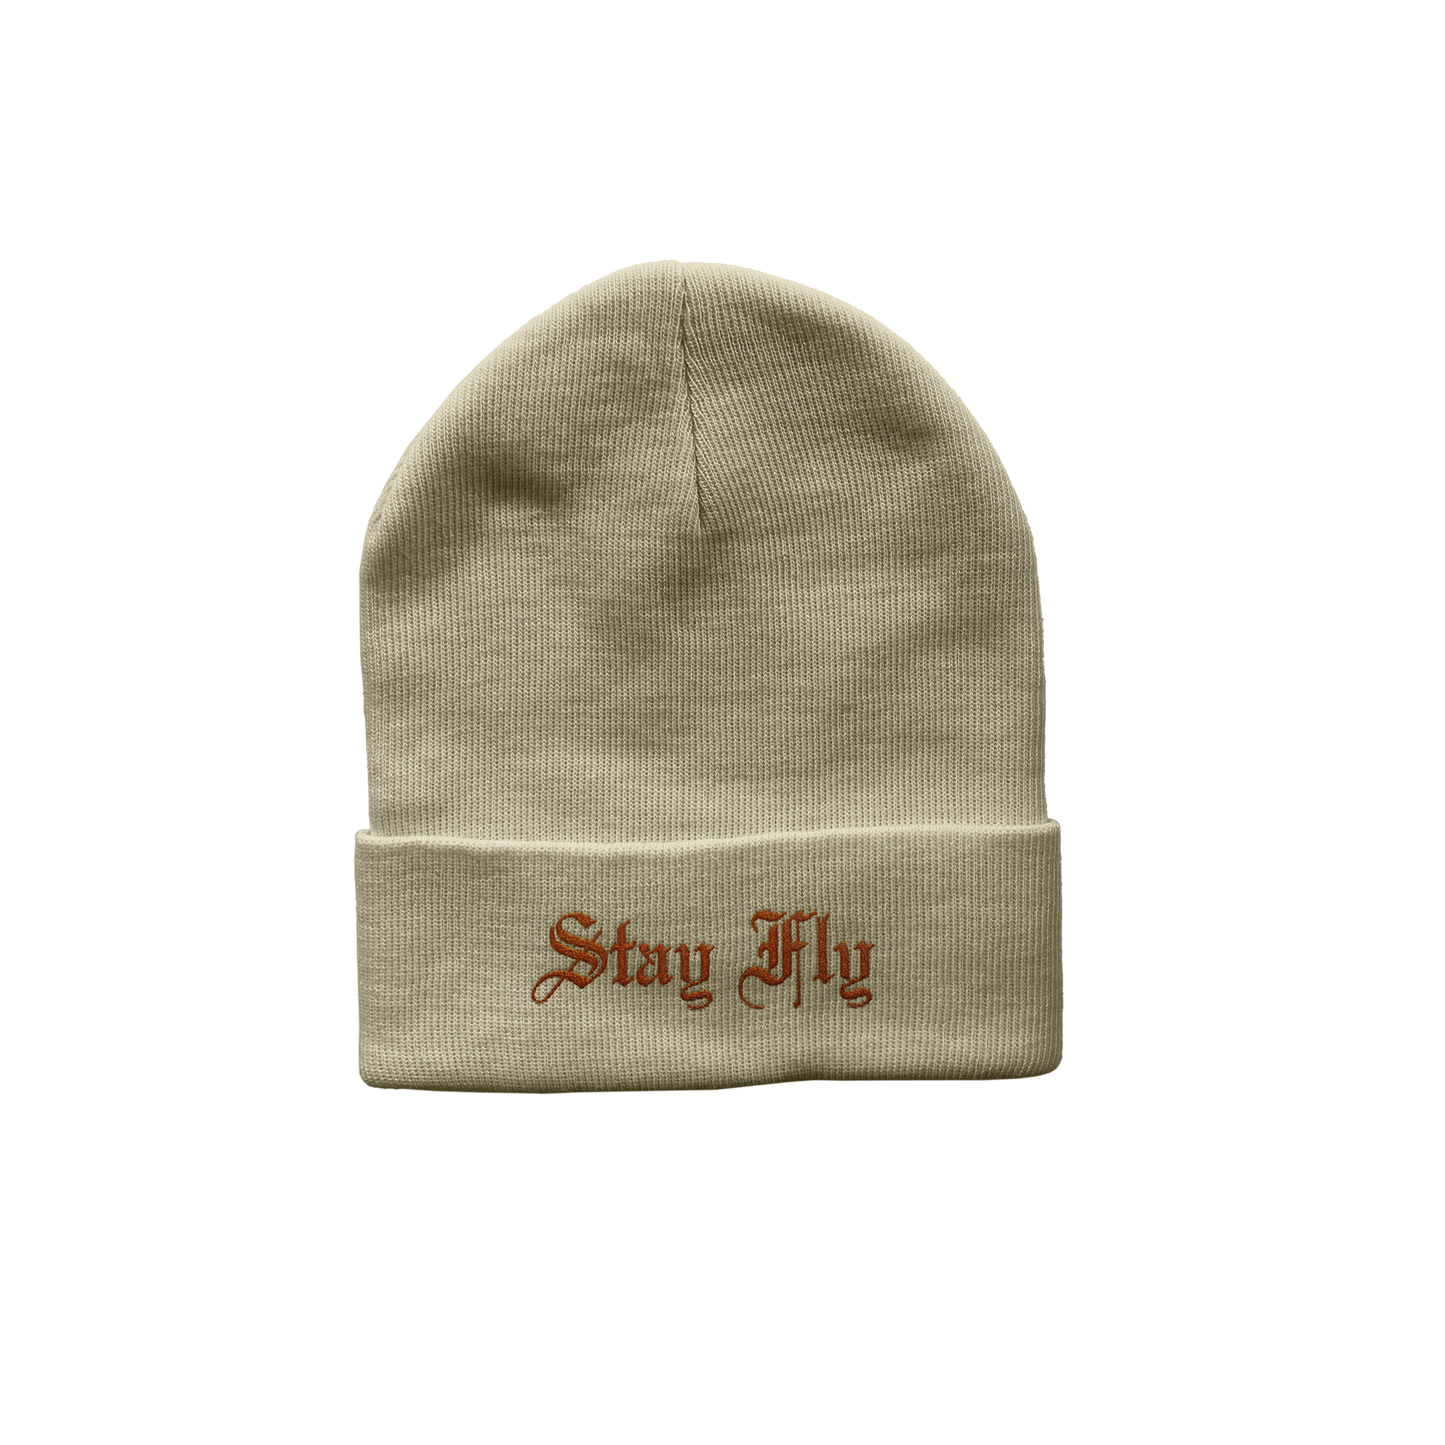 Adults Stay Fly Embroidered Beanie